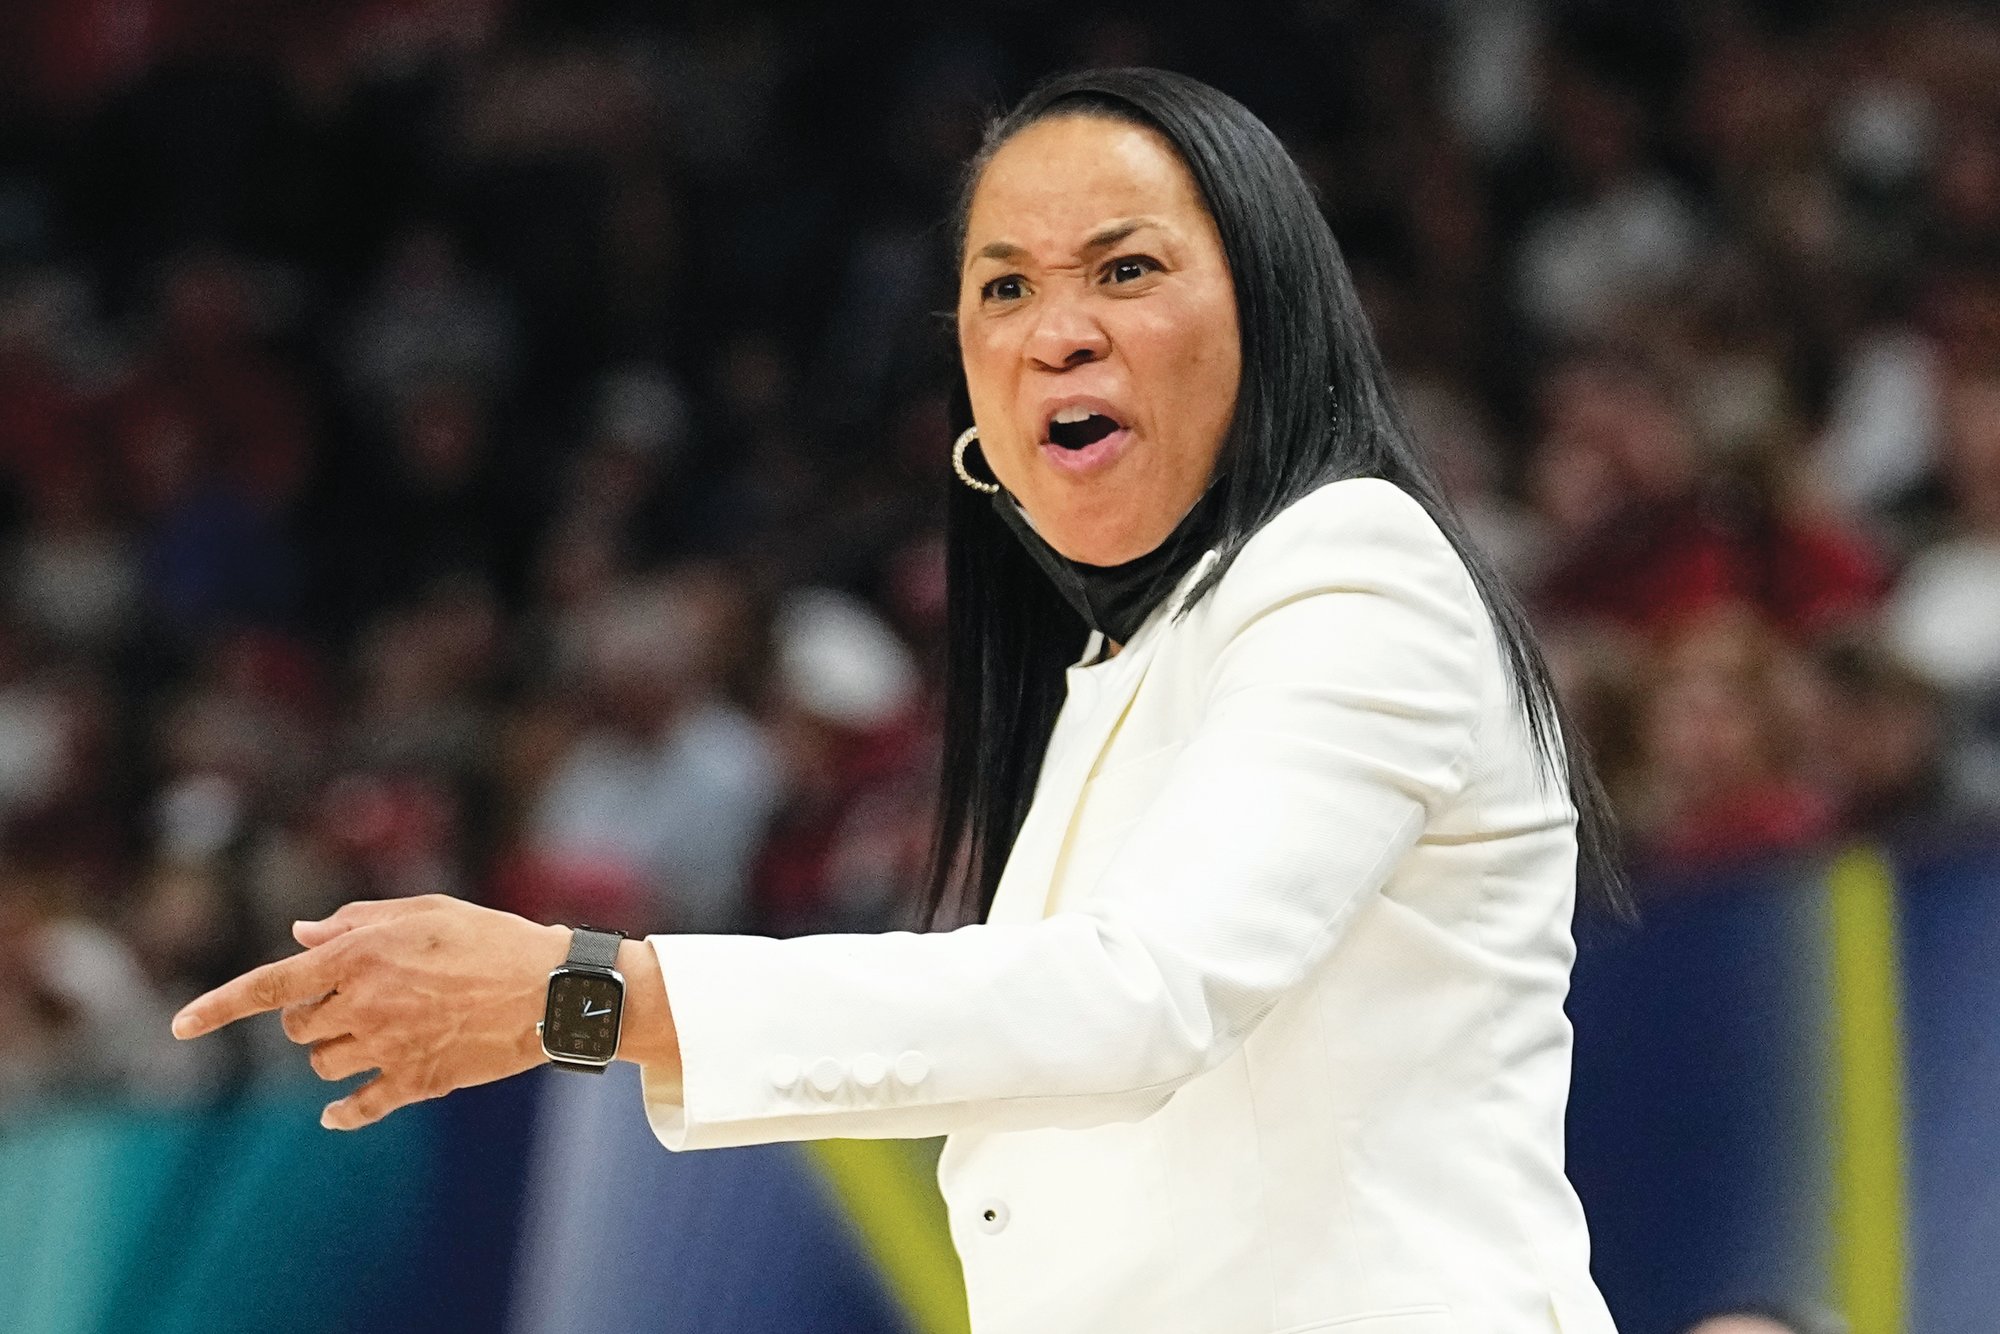 Is Dawn Staley's Personal Life as Coordinated as Her Coaching Career?